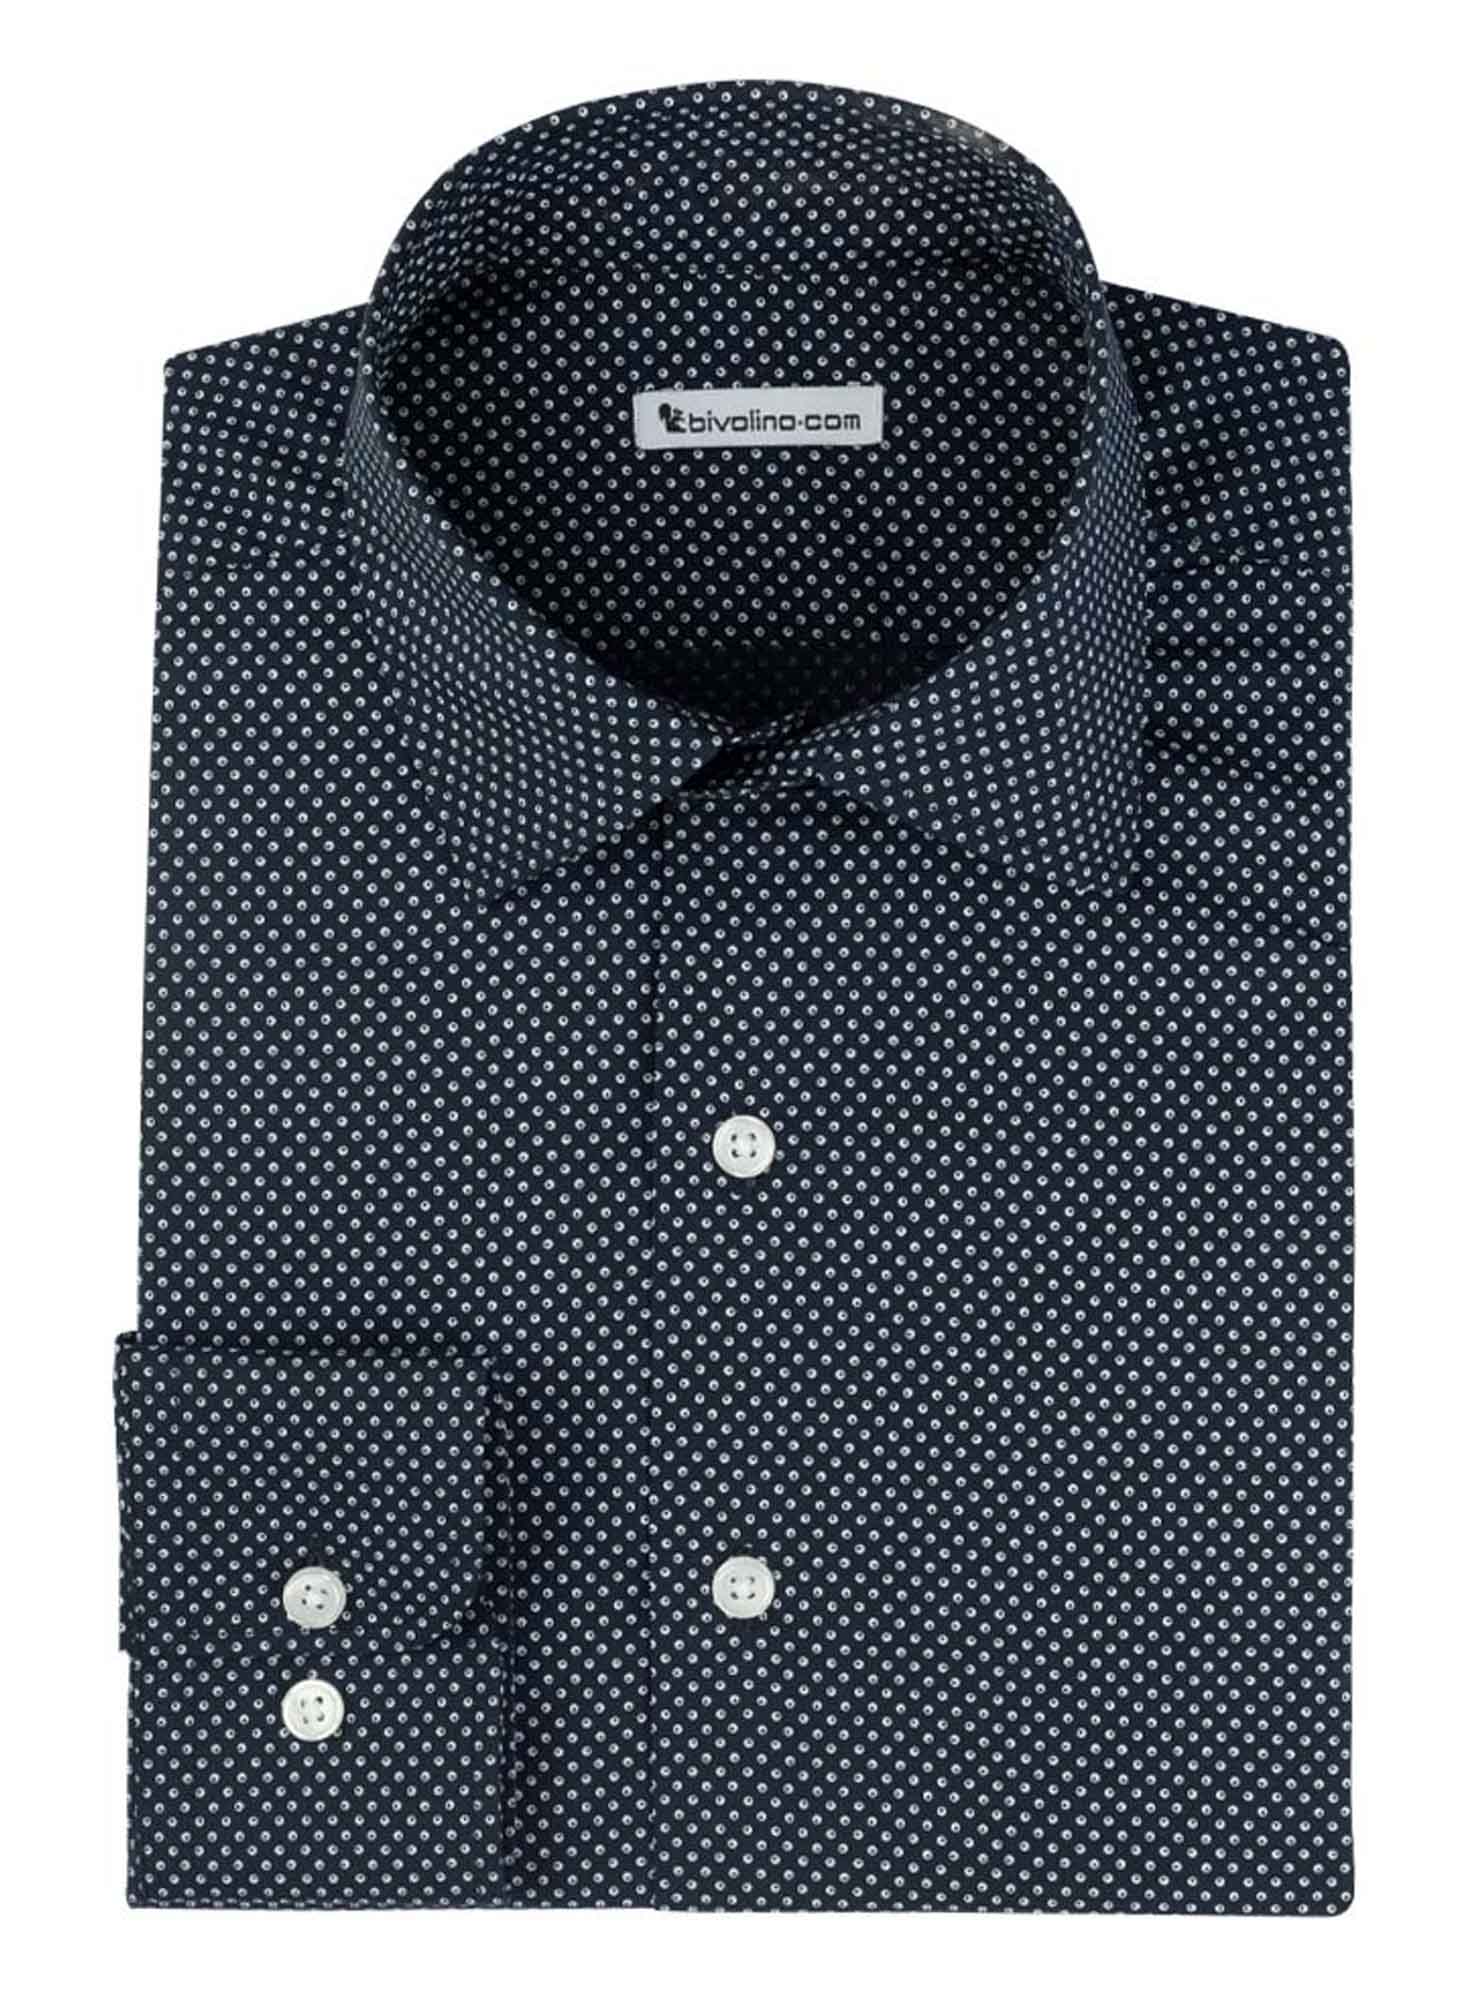 made to measure shirts online